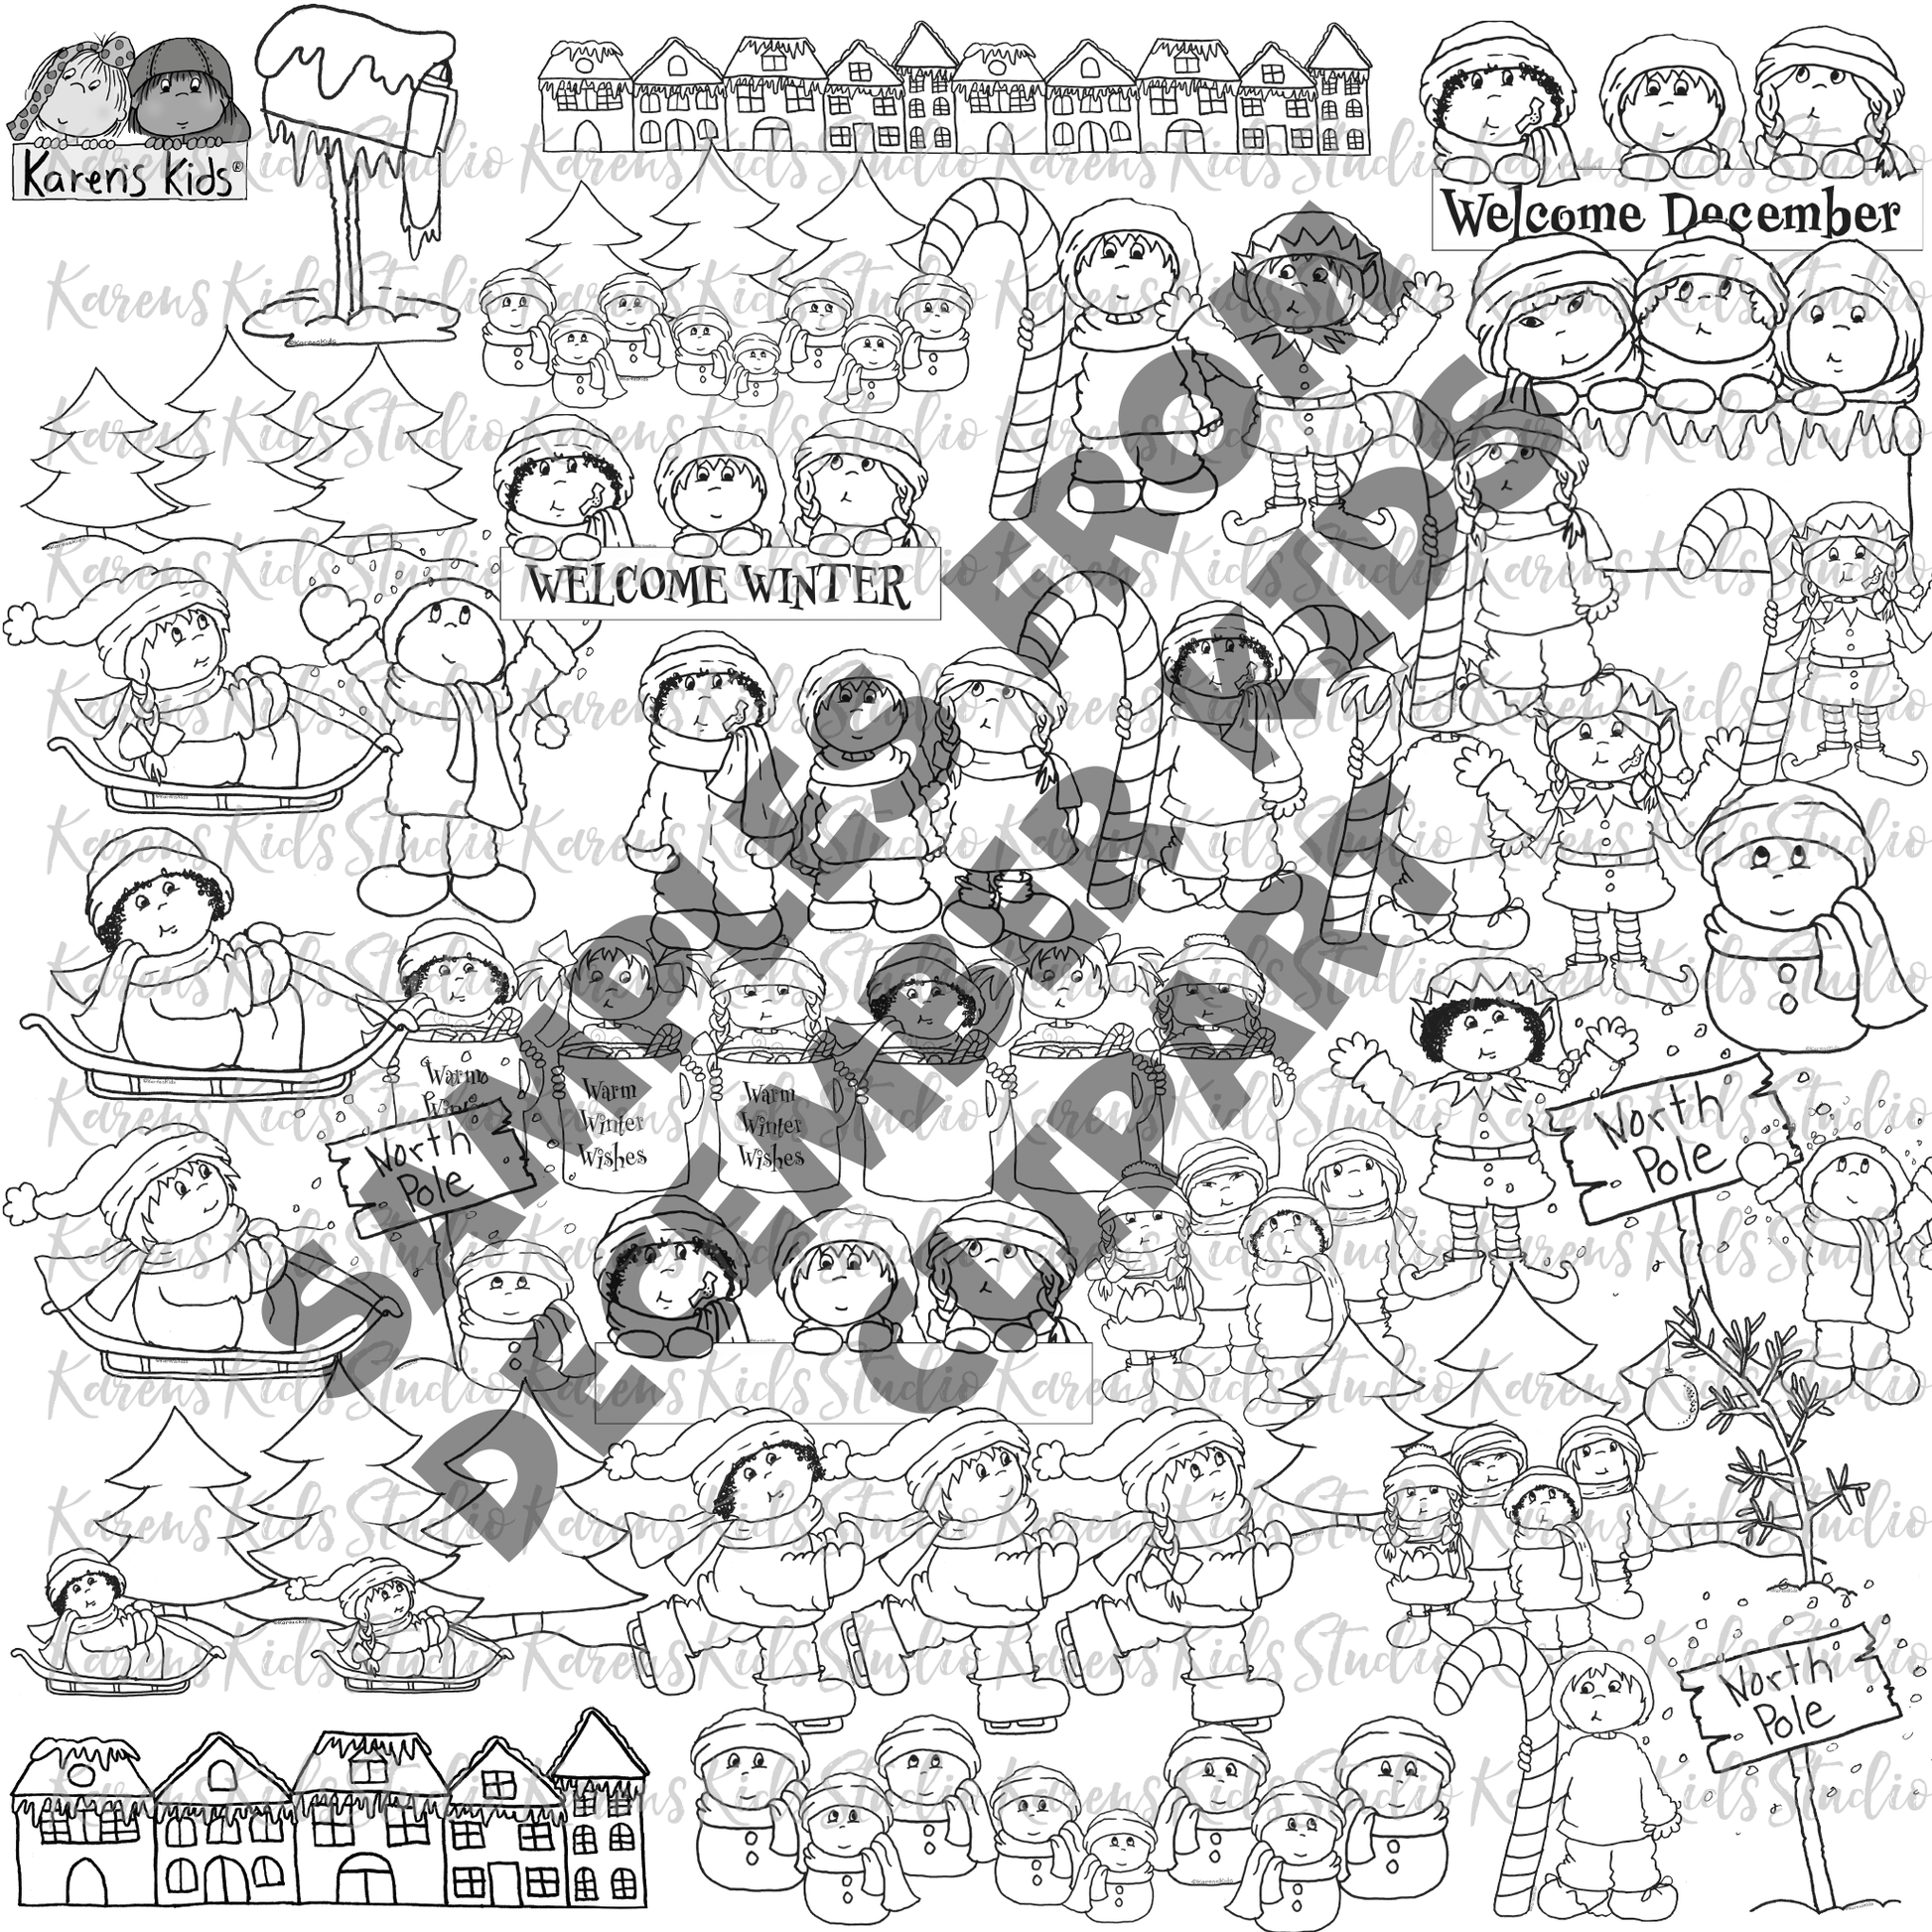 Samples of black and white images of Karens Kids December and winter clipart images.